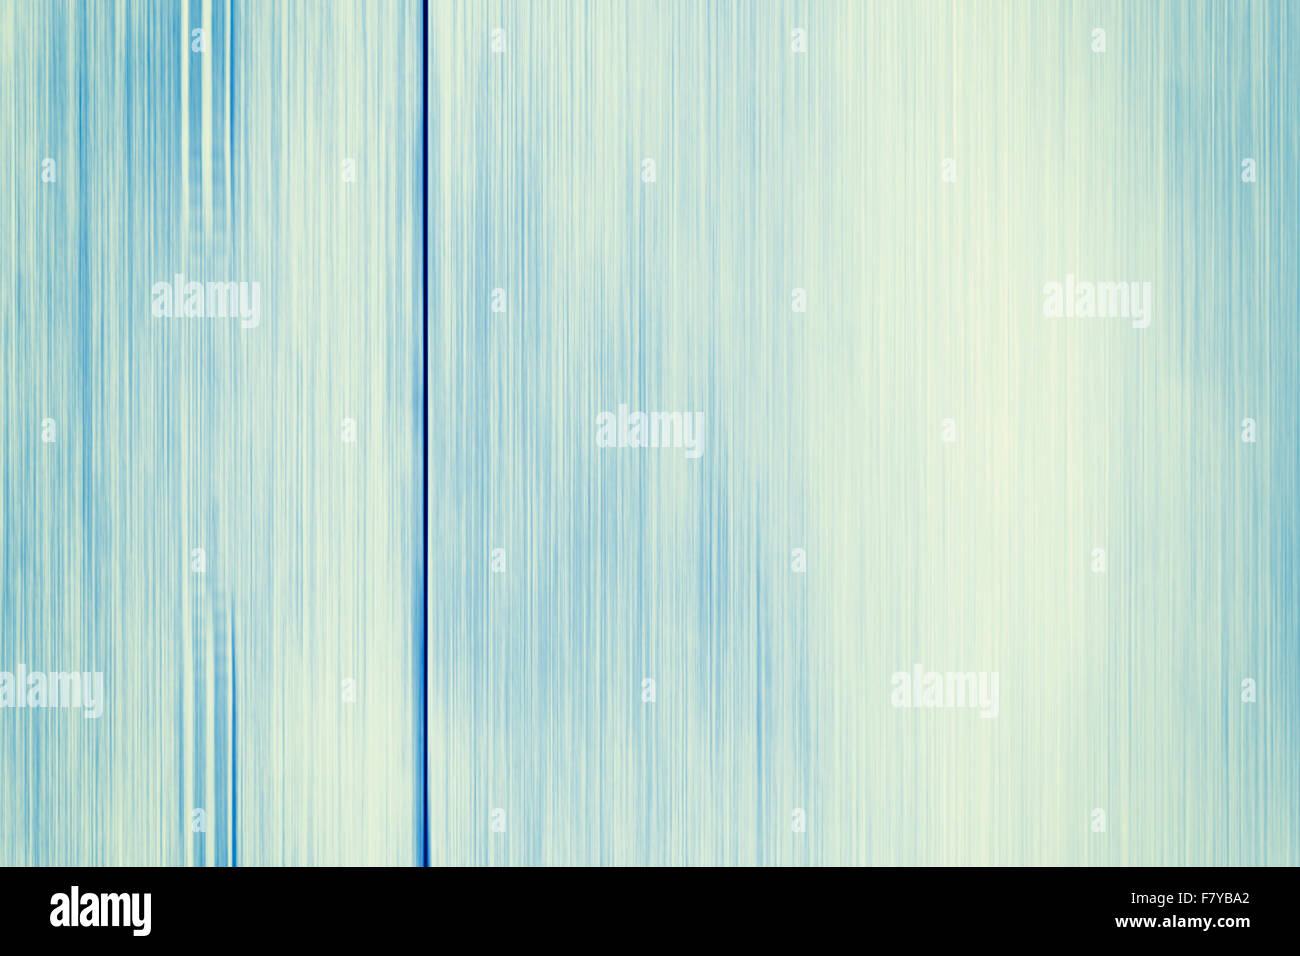 Abstract motion blurred blue background or texture. Stock Photo